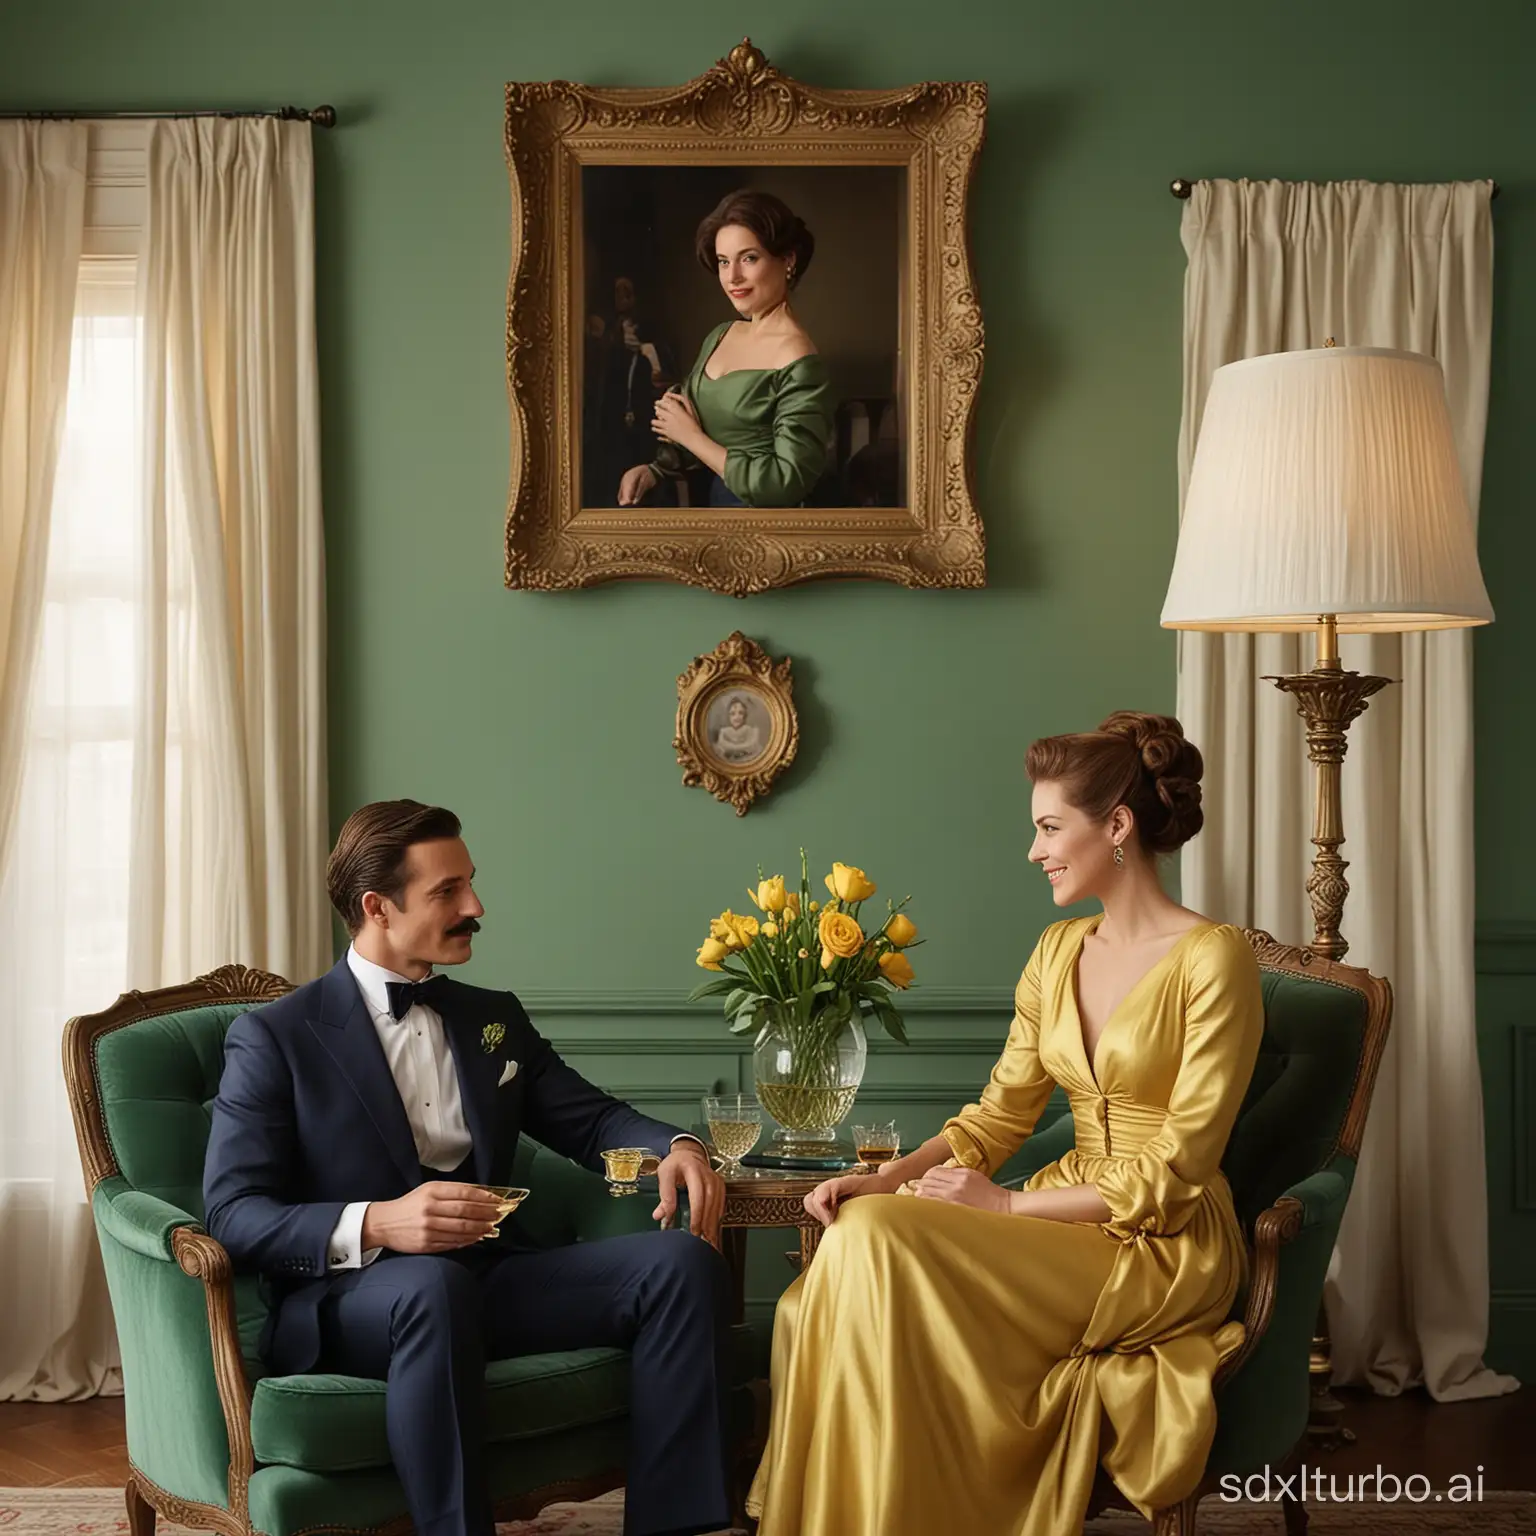 Sophisticated-Vintage-Living-Room-Conversation-with-Man-and-Woman